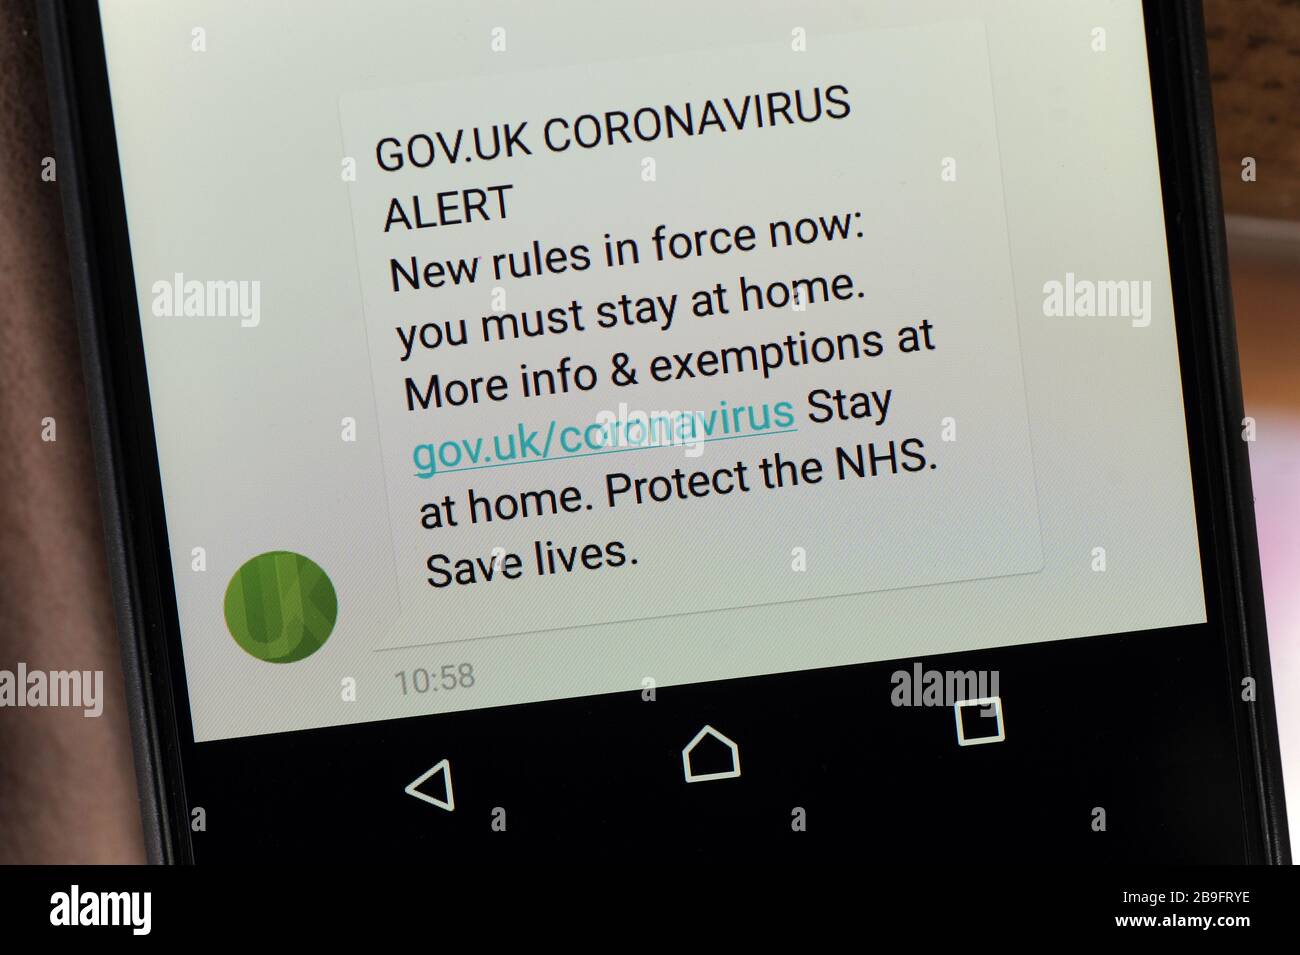 UK GOVERNMENT CORONAVIRUS ALERT MOBILE PHONE TEXT MESSAGE SAYING YOU MUST STAY AT HOME RE LOCKDOWN COVID -19 VIRUS UK Stock Photo